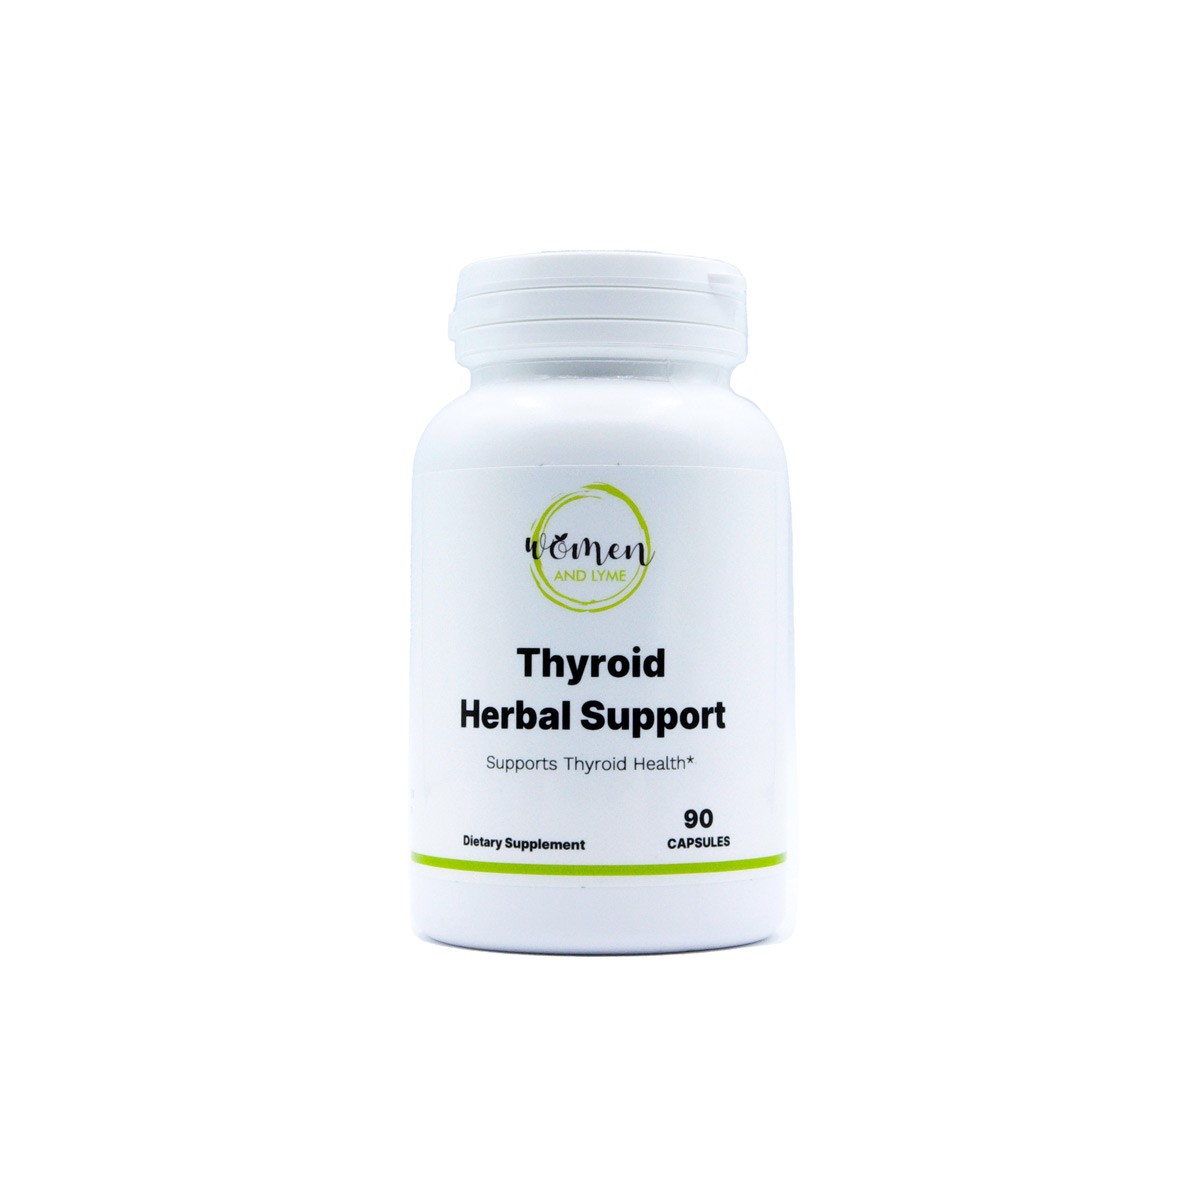 Thyroid Herbal Support